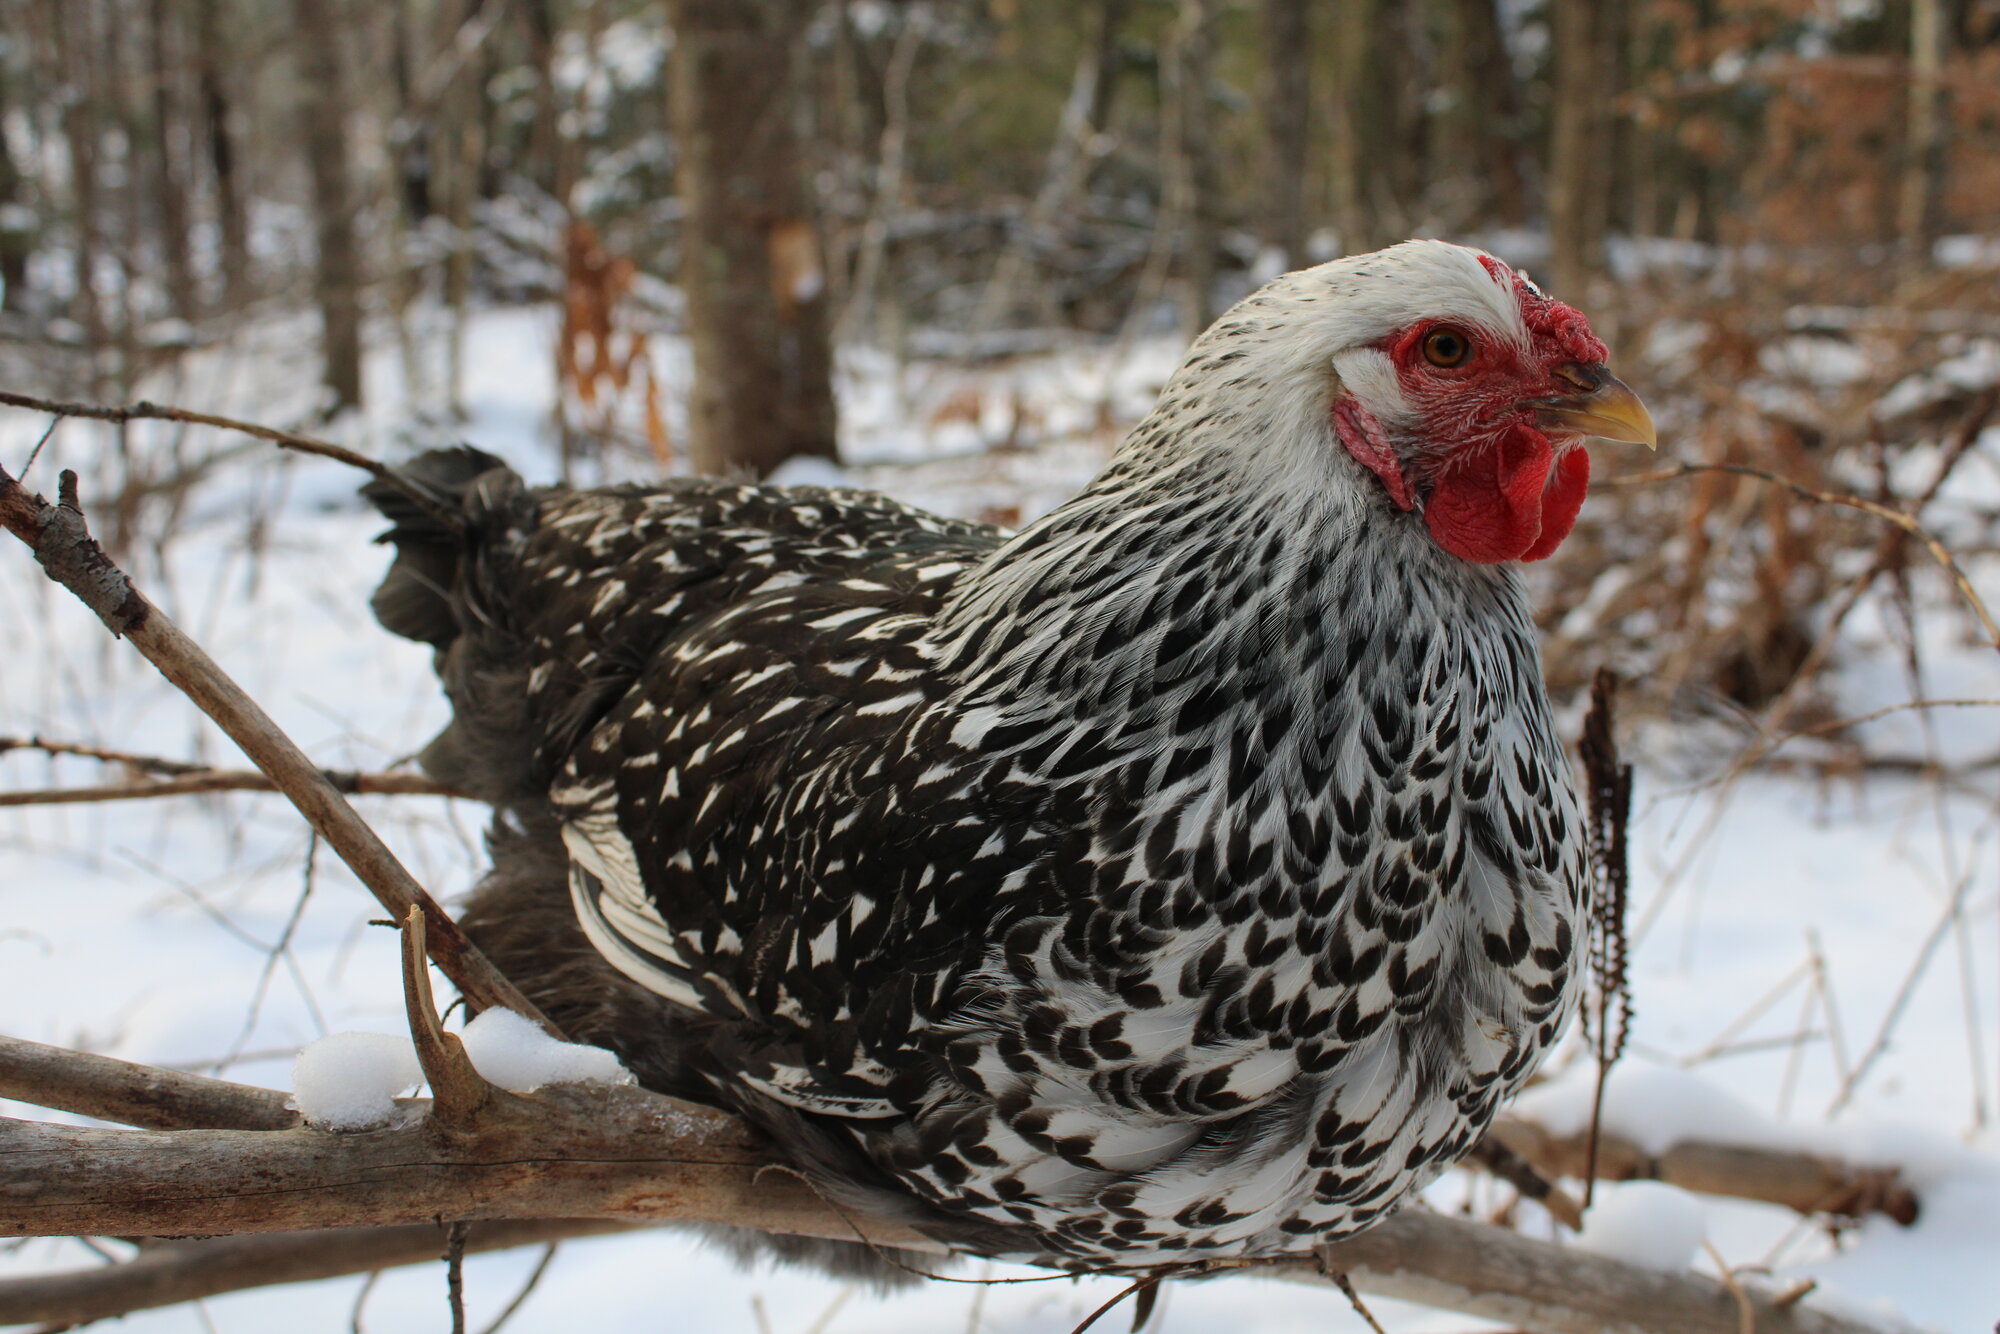 Penny the Silver-Laced Wyandotte